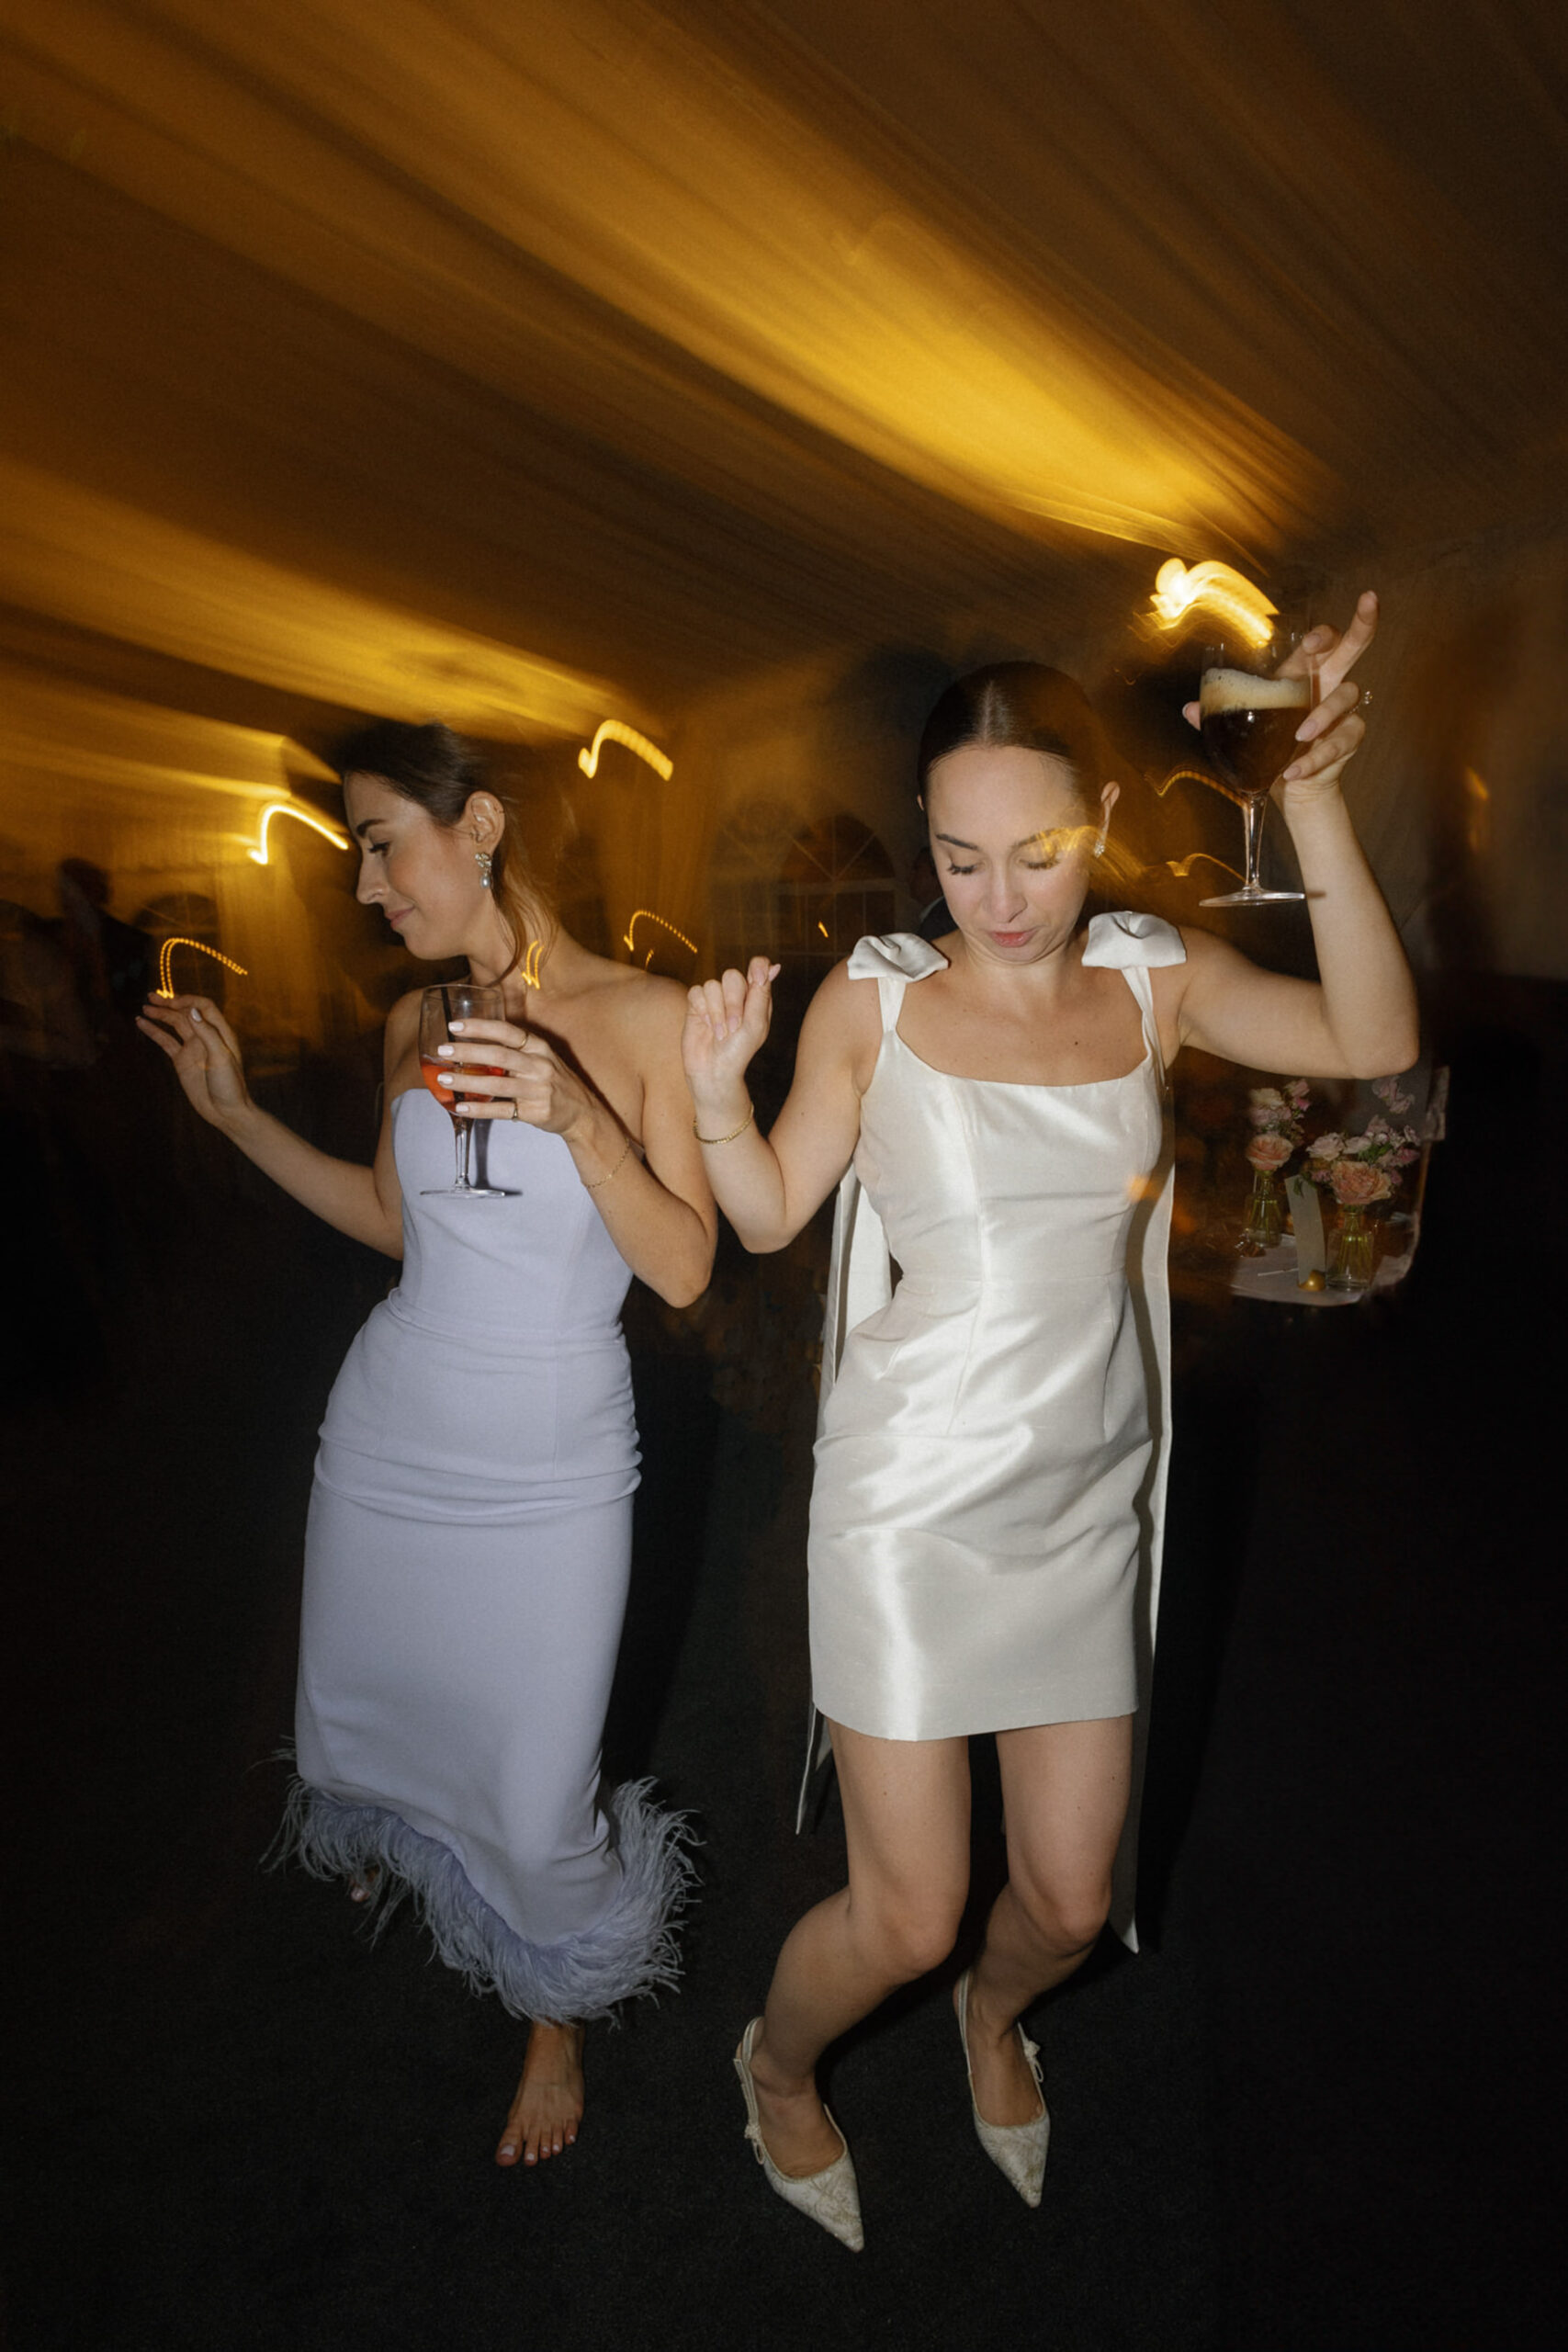 bride dancing with guest at wedding reception shutter drag